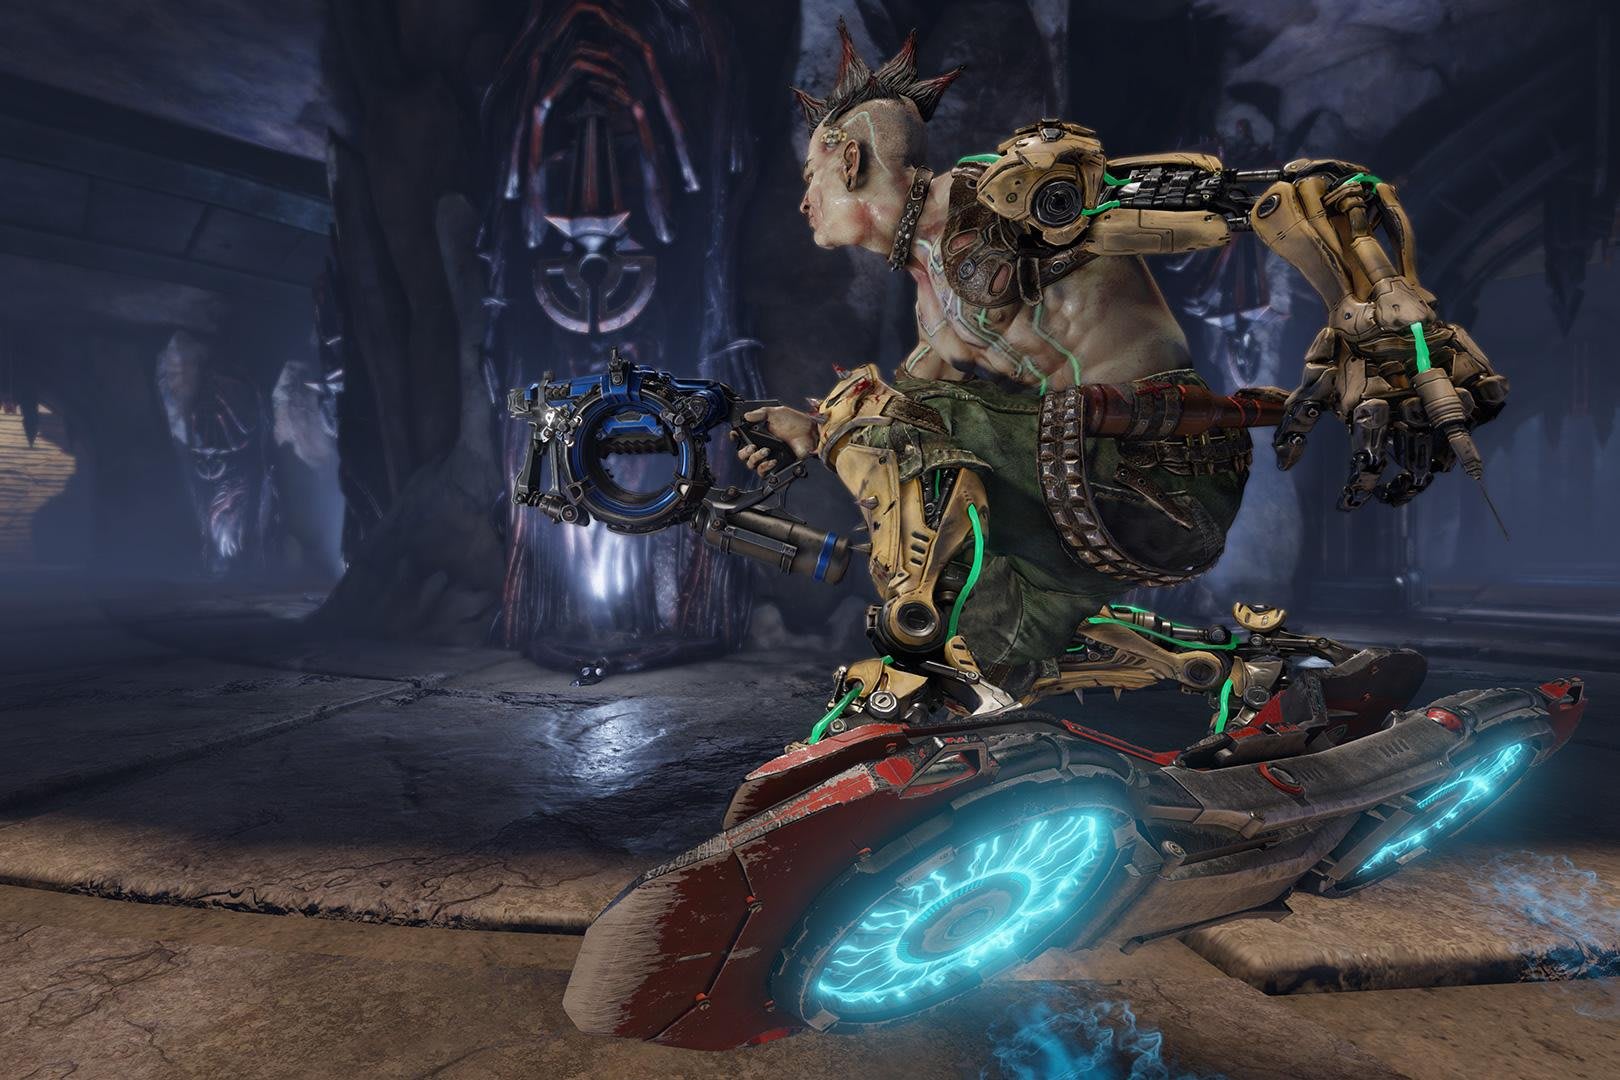 uddannelse spredning arsenal Quake champions: Read the interview with id software